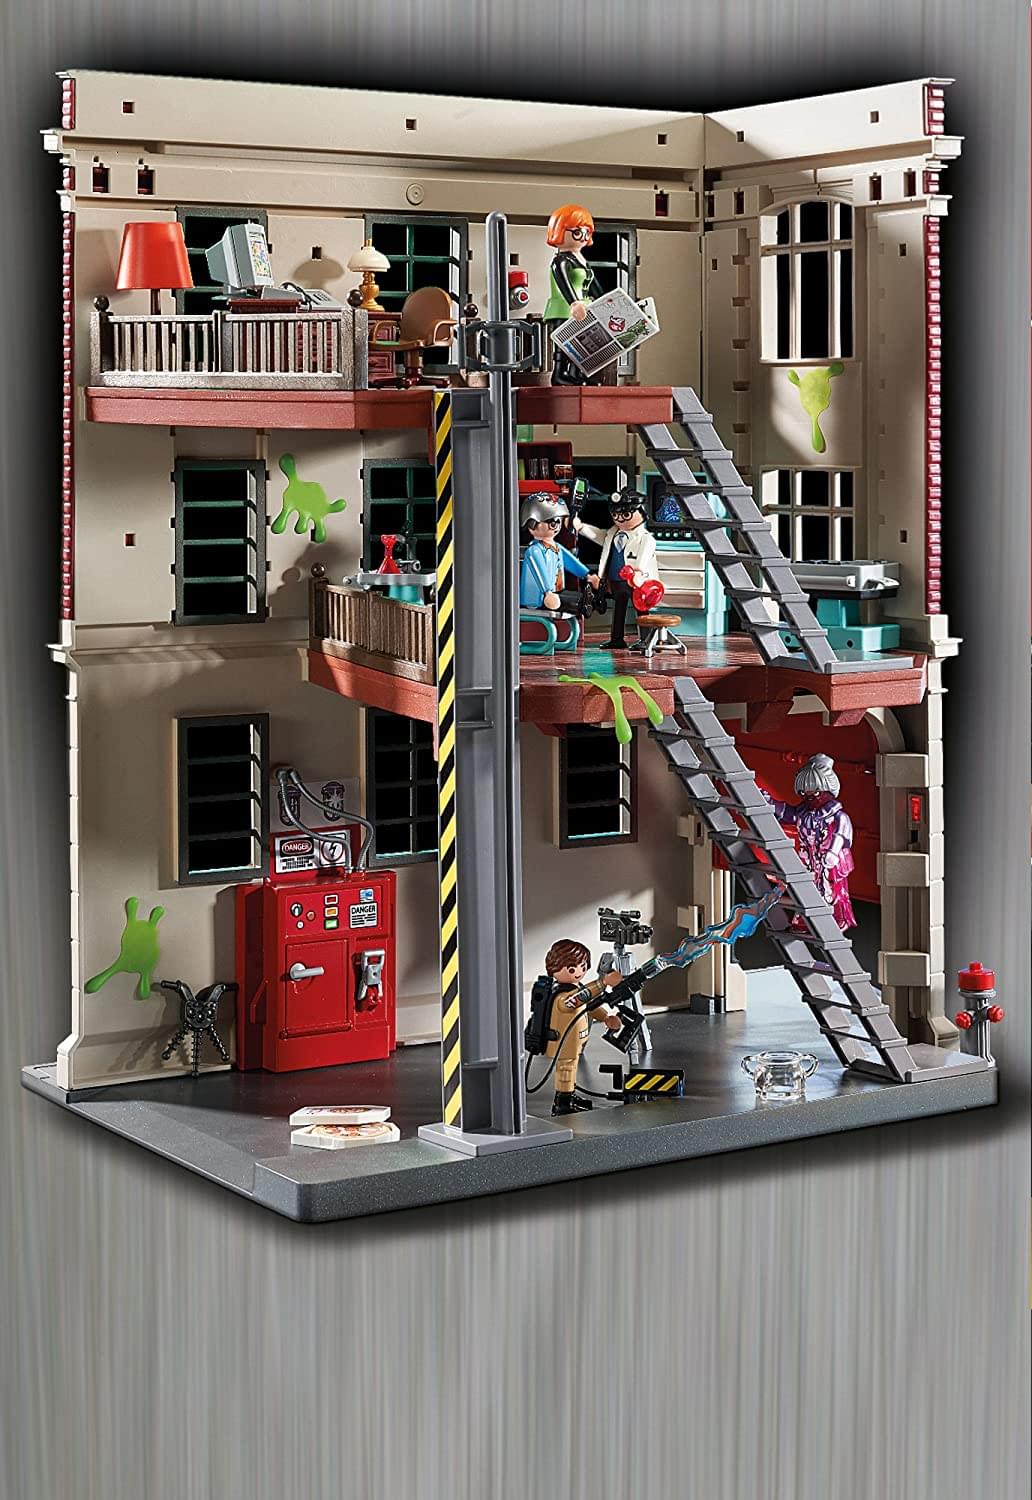 Playmobil Firehouse Free Shipping